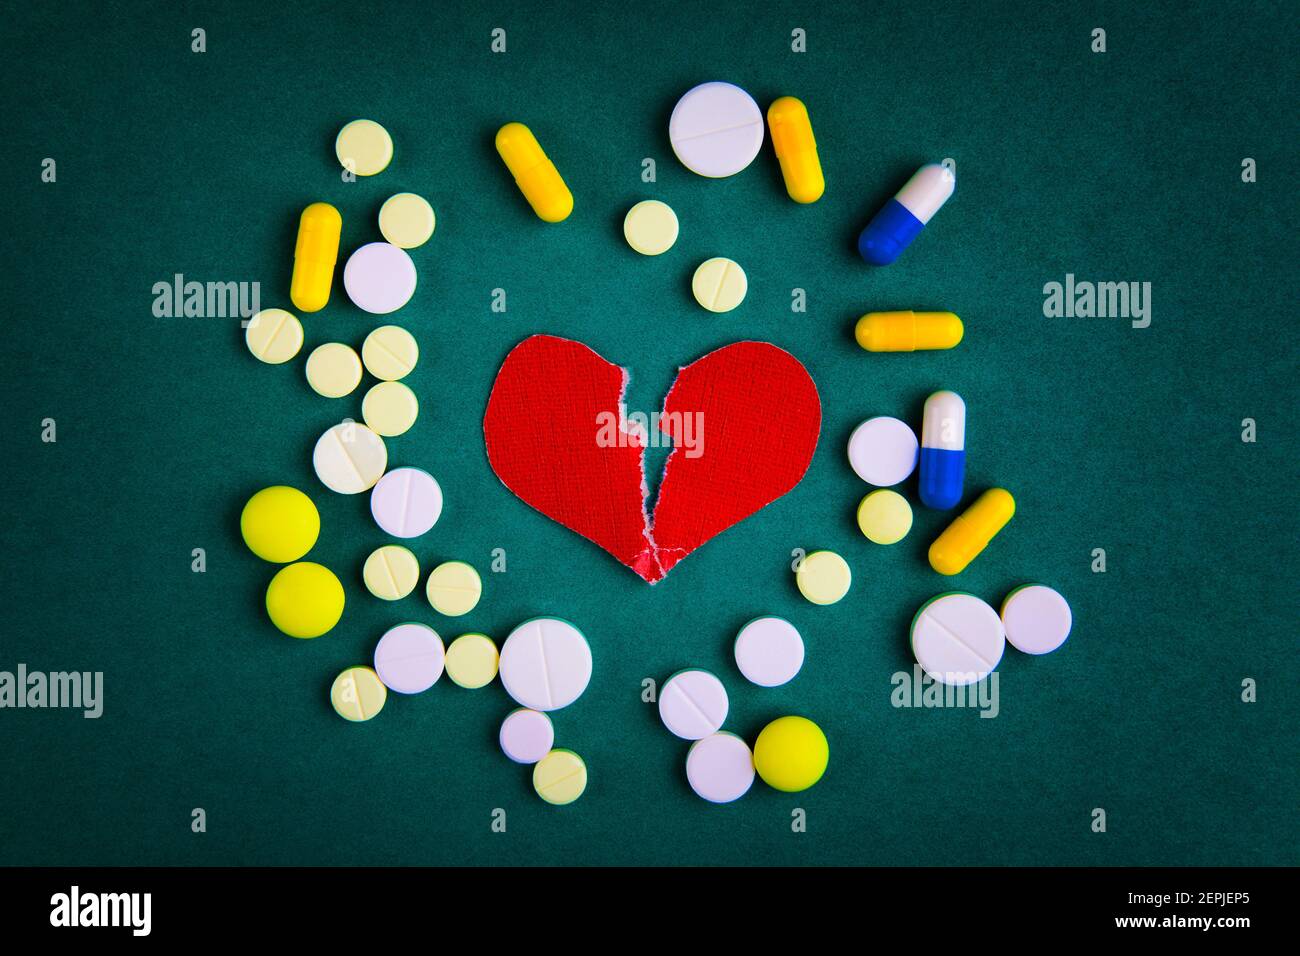 Broken Red Heart Shape with a Pills on the Green Background Stock Photo